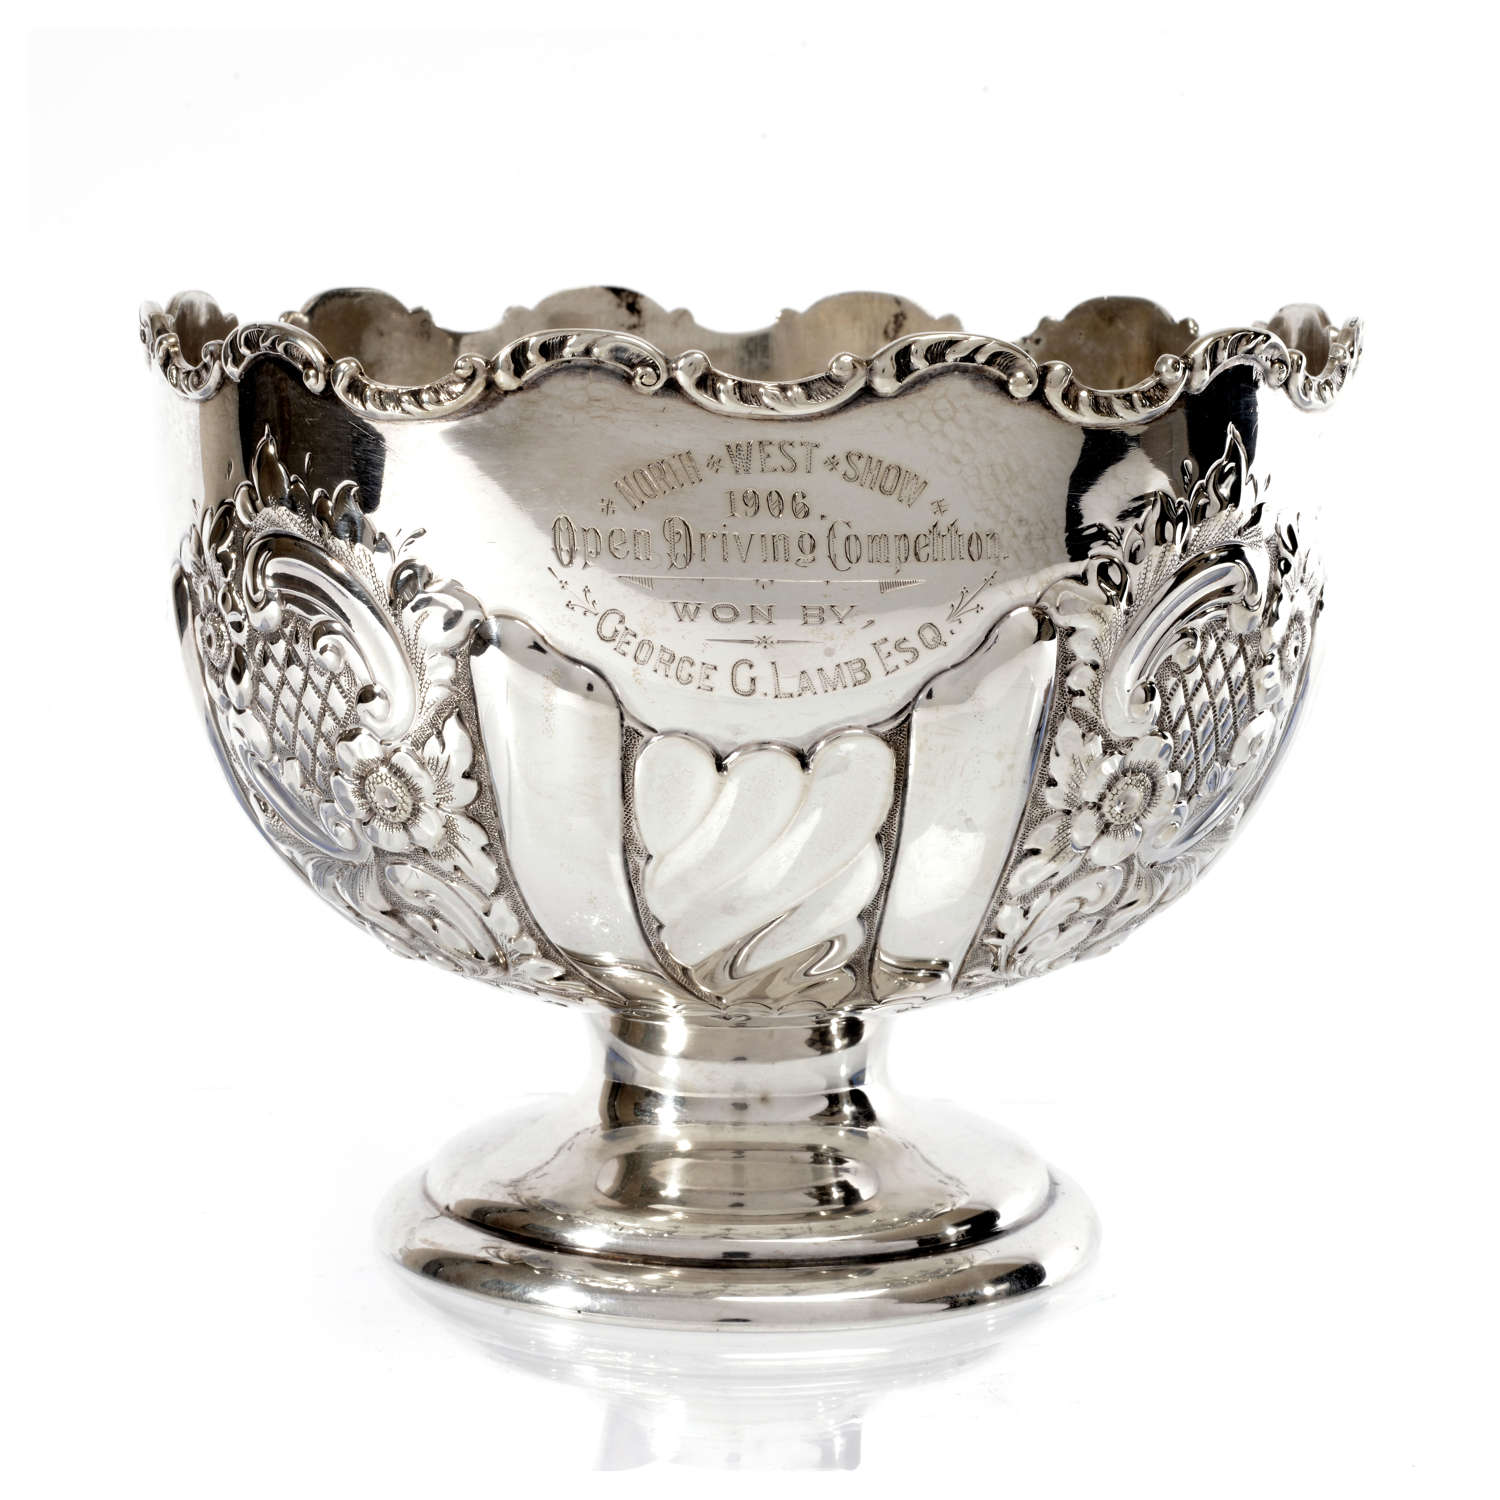 Edwardian Silver Carriage Driving Trophy Rose Bowl